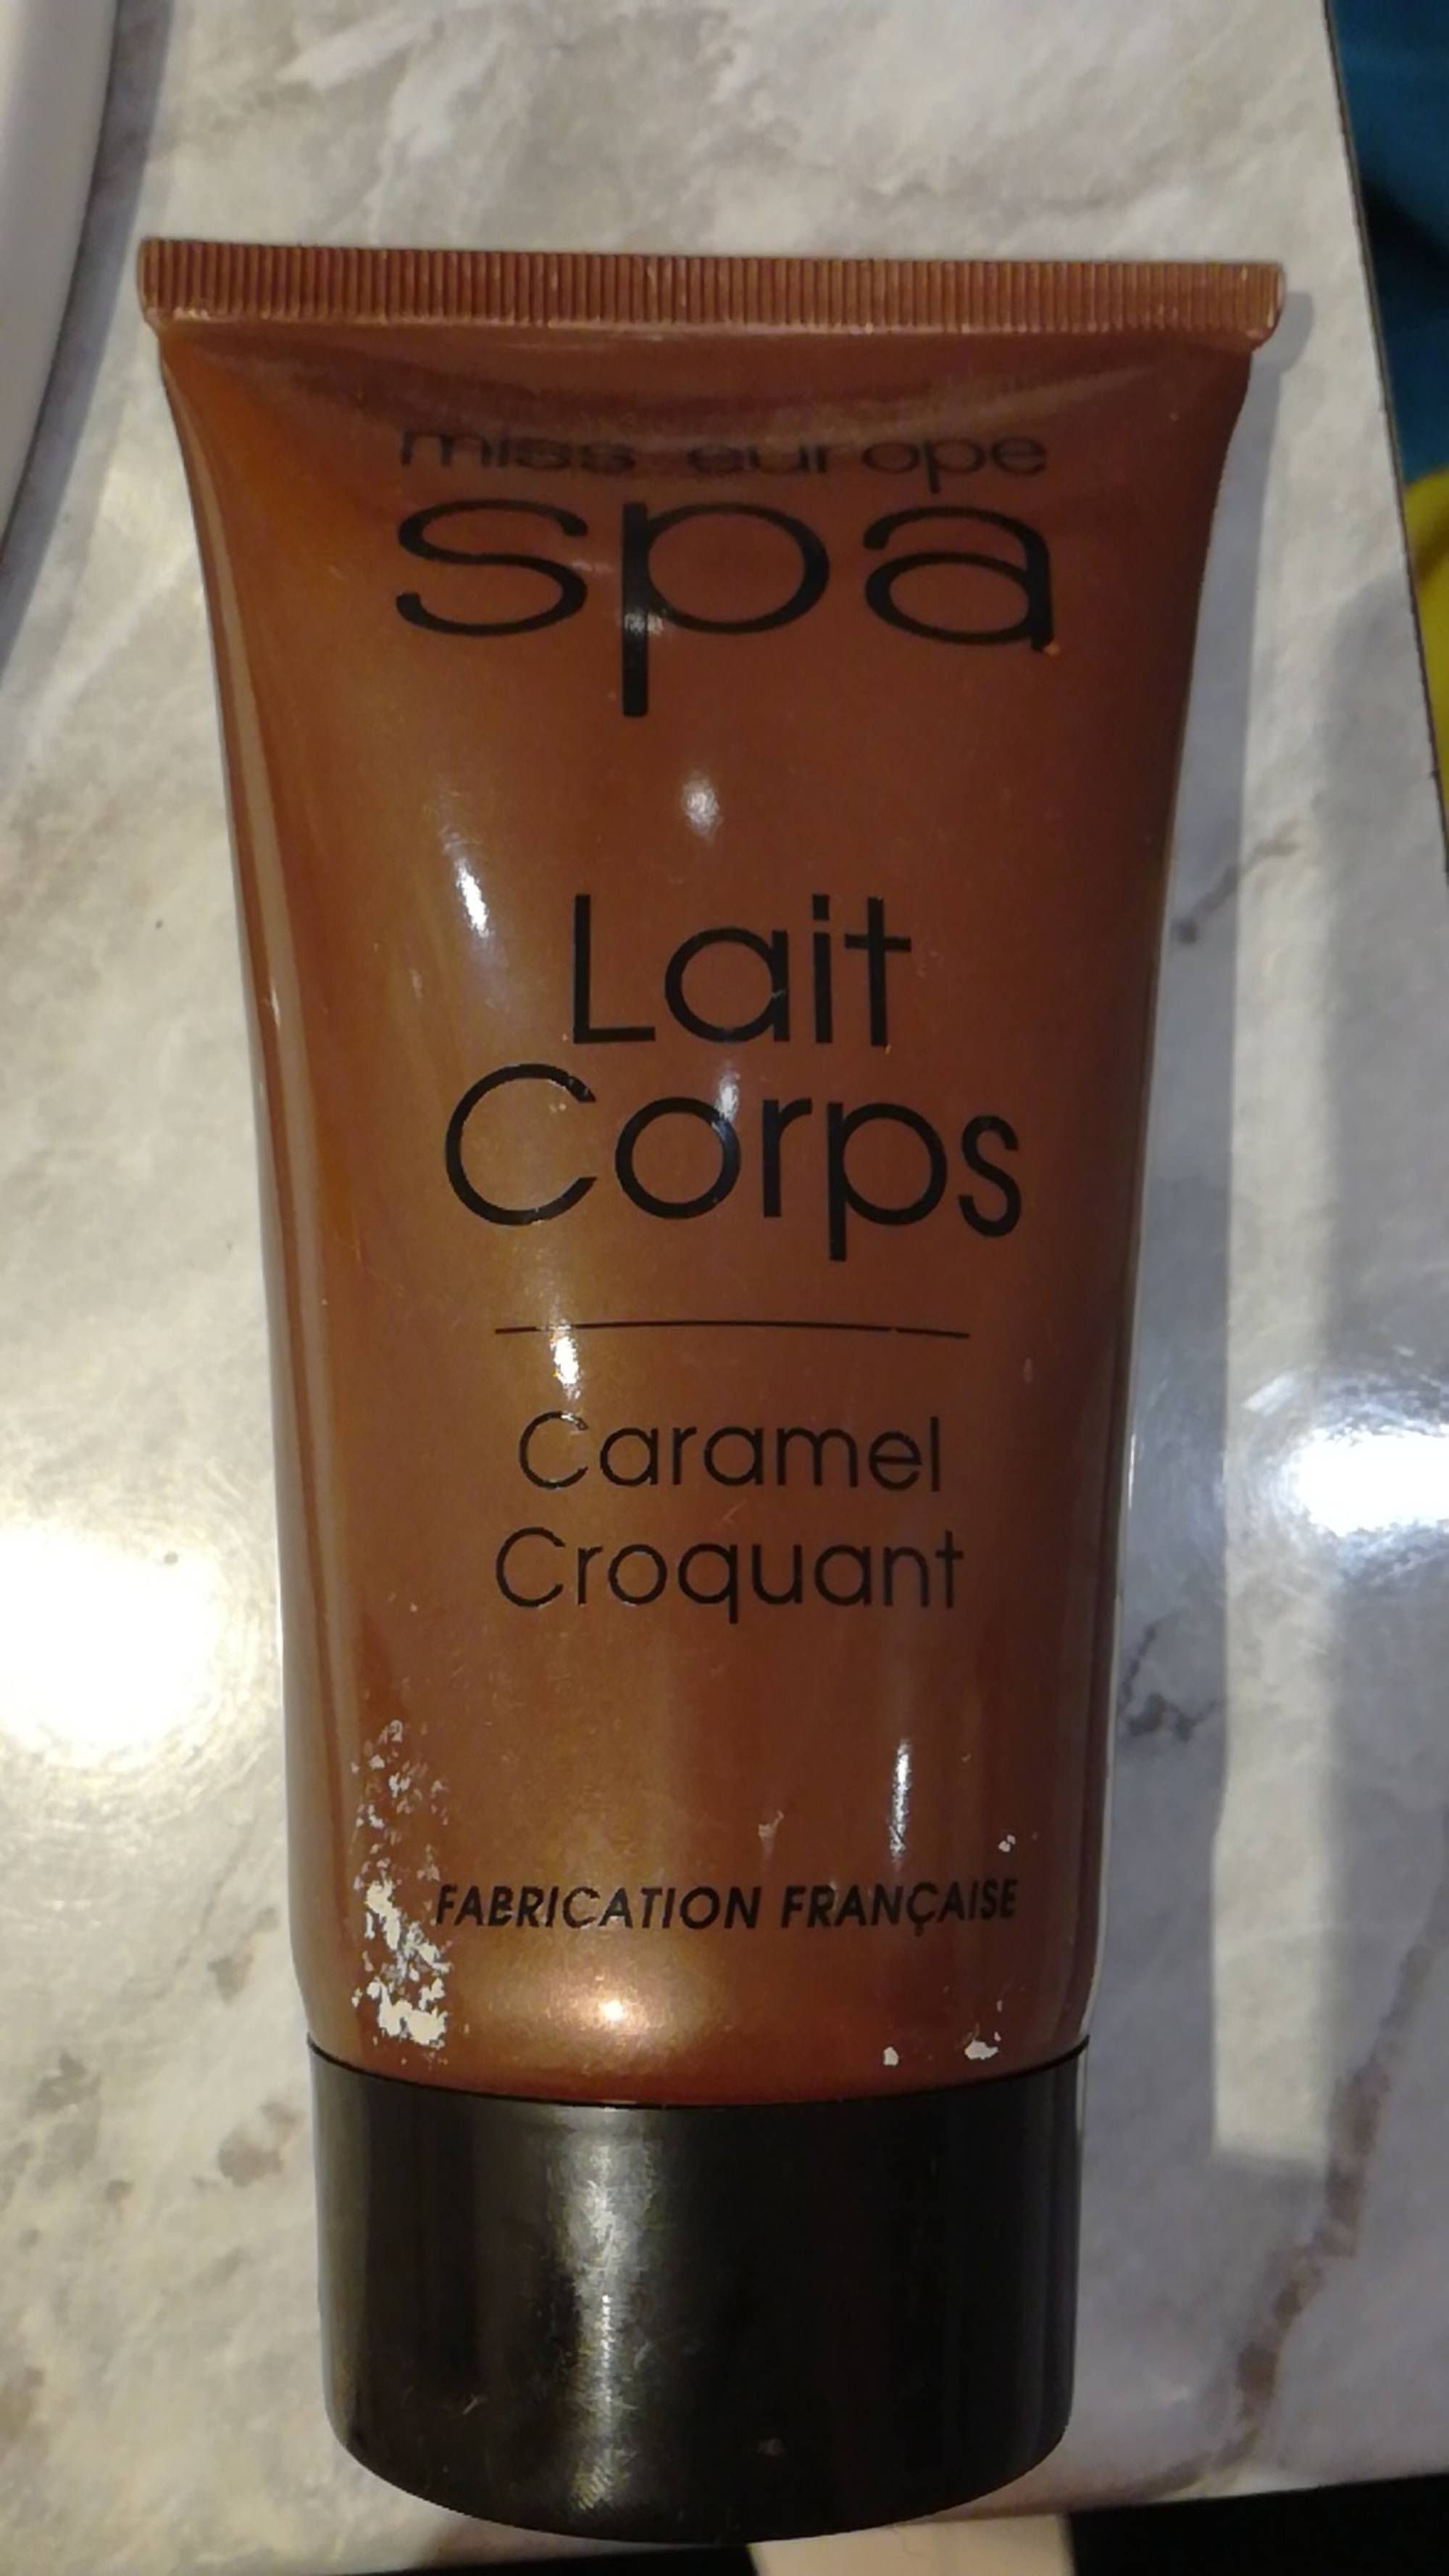 MISS EUROPE - Spa - Lait corps